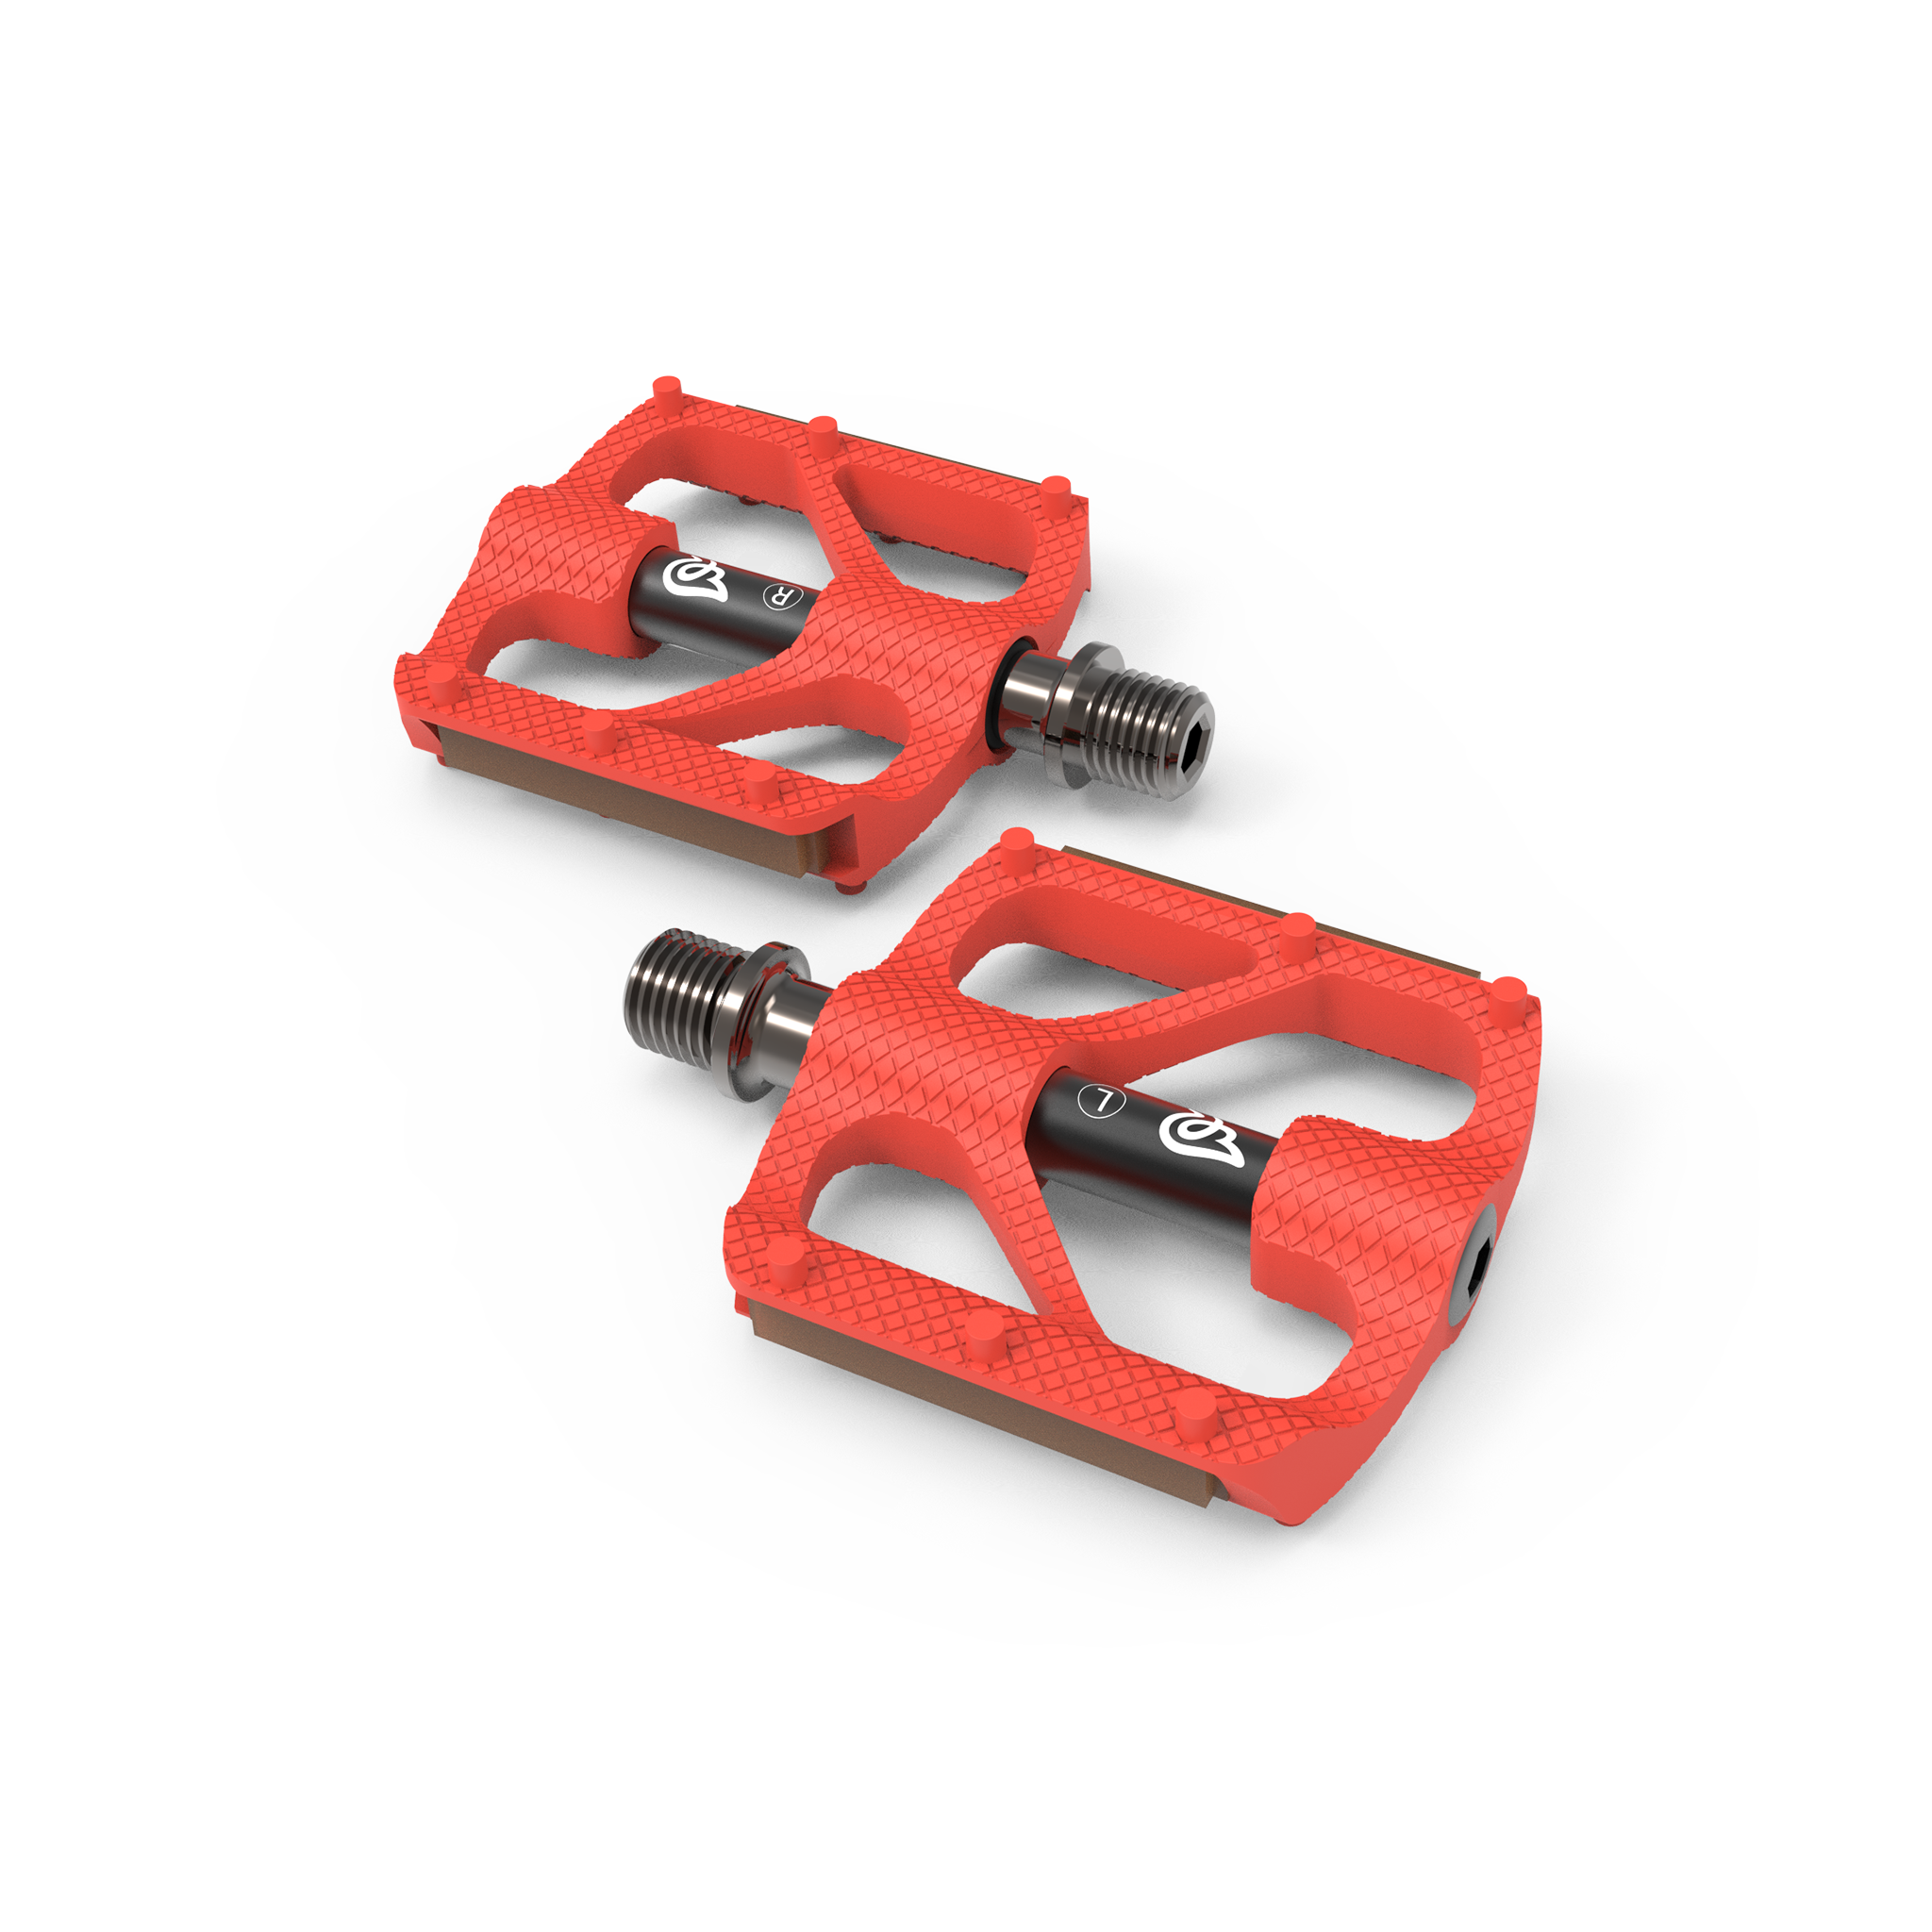 Early Rider P1 Resin Platform Pedals Red